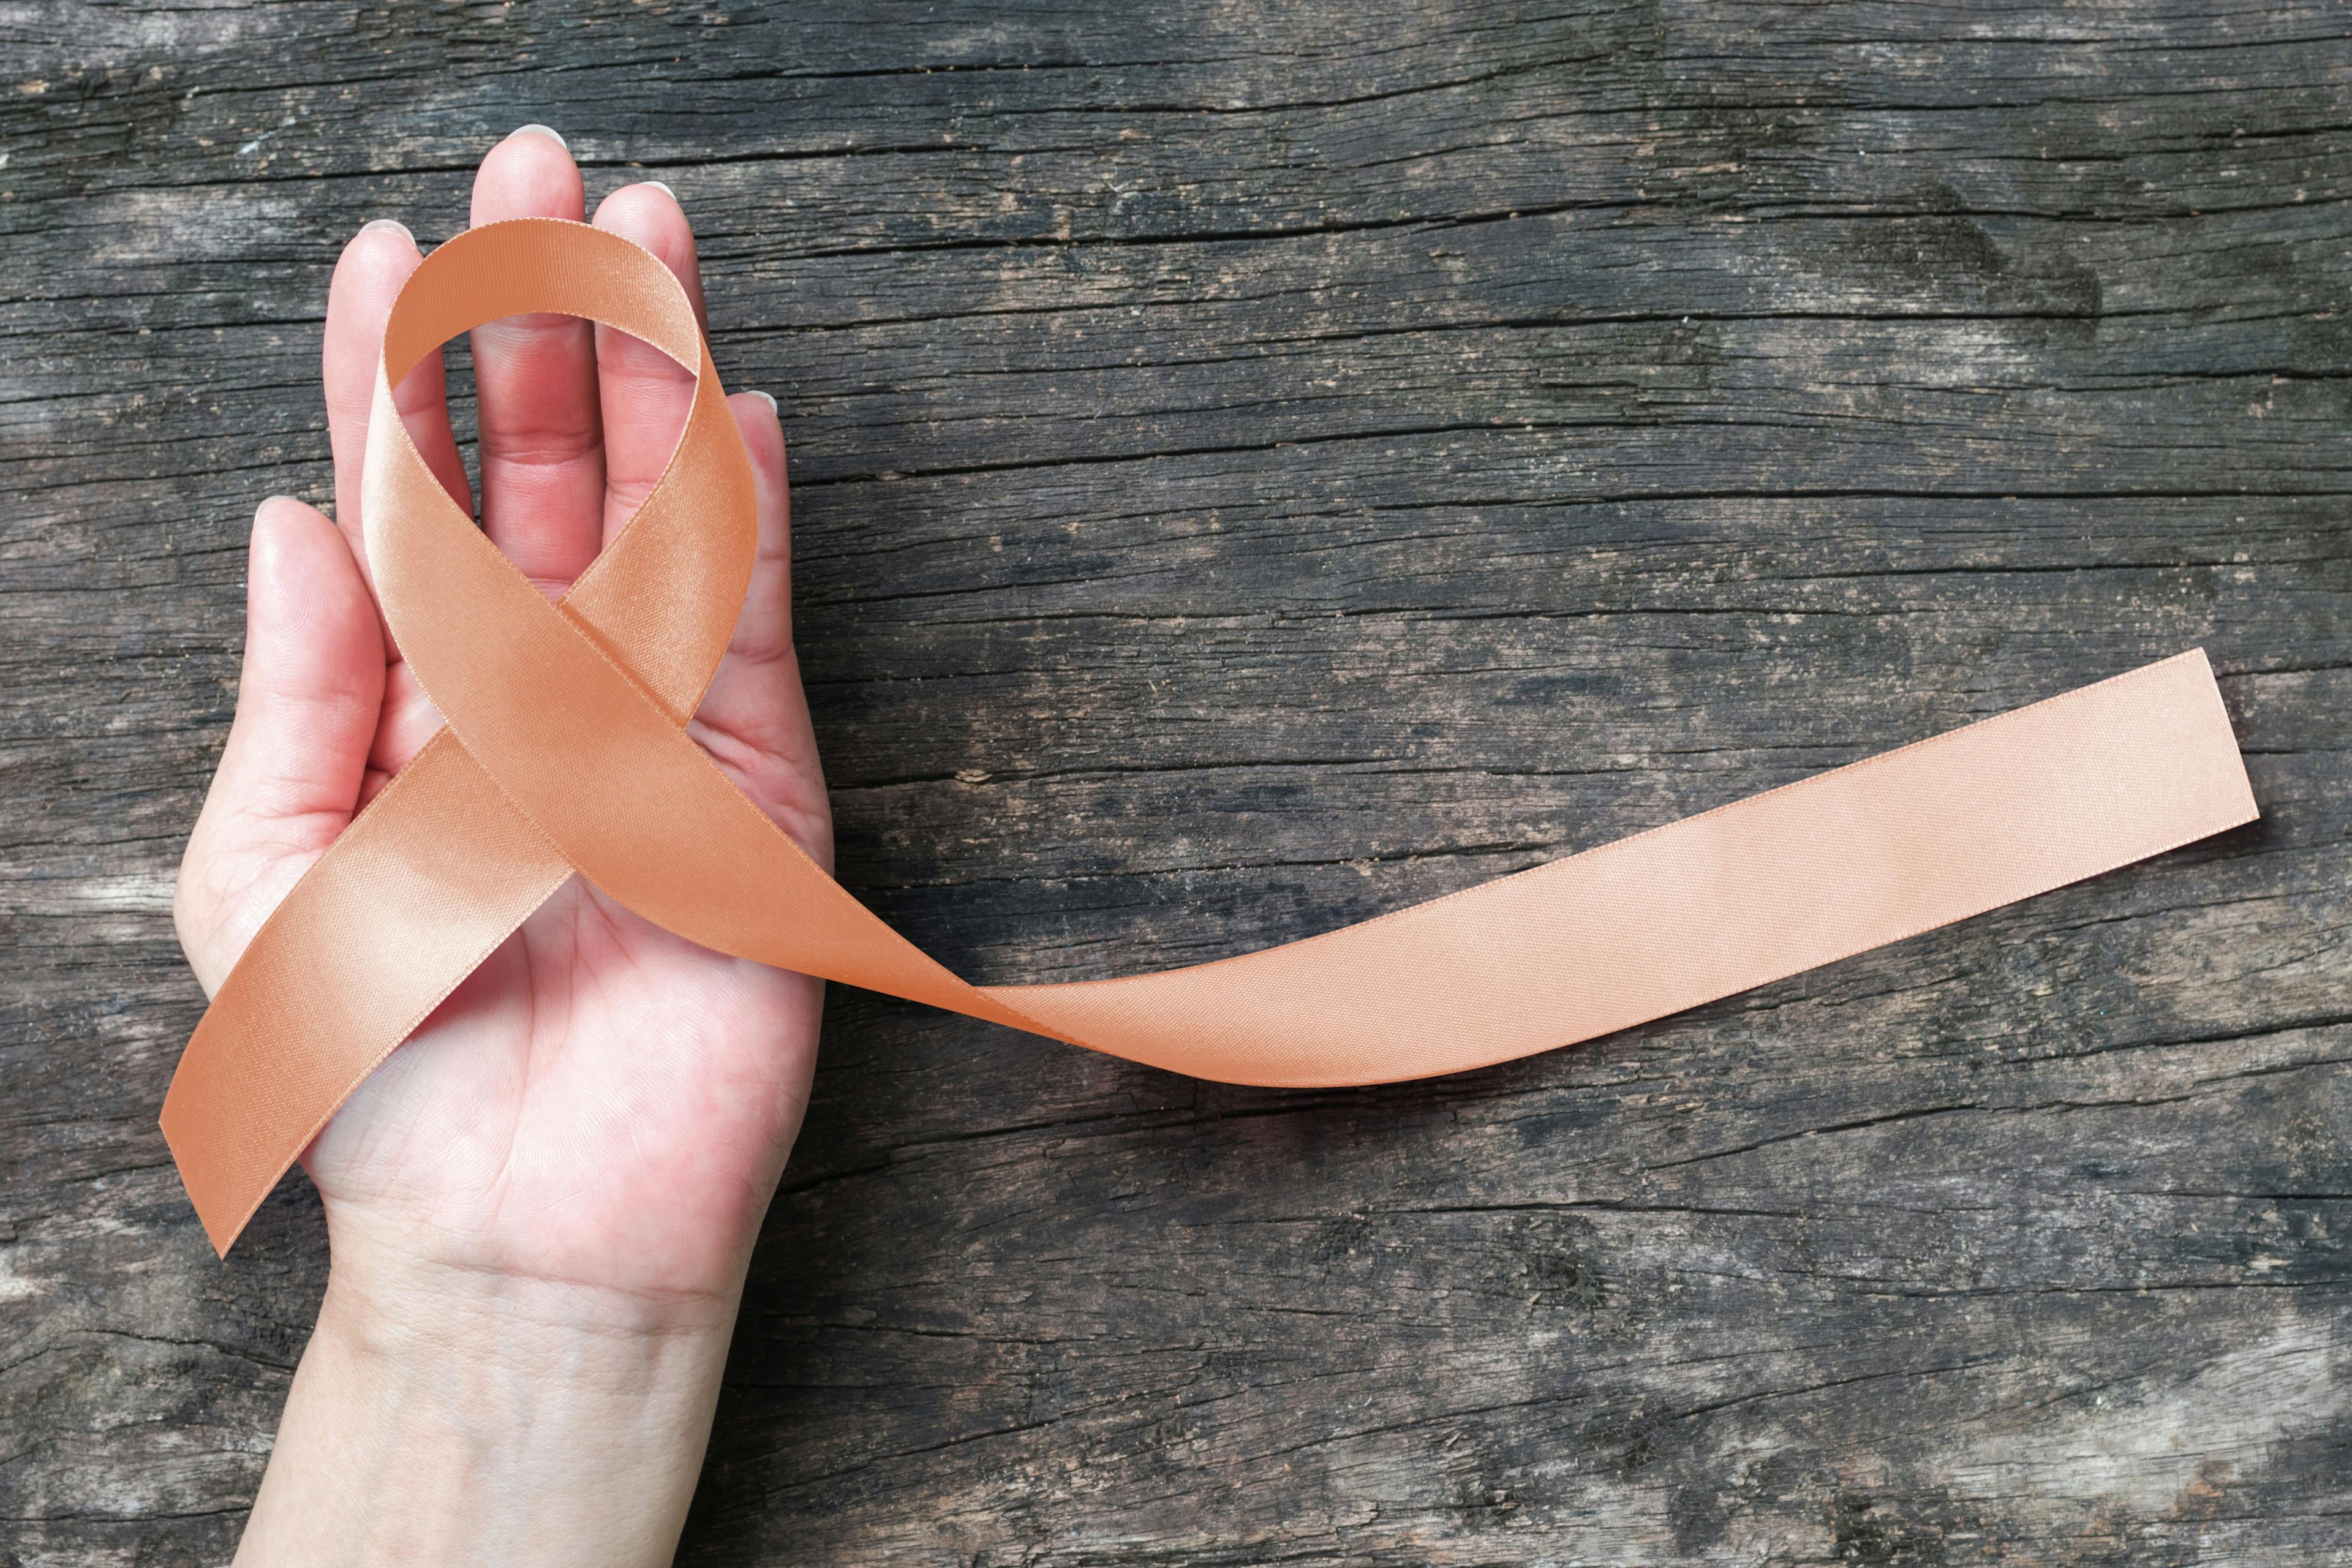 Peach ribbon for endometrial cancer awareness -- Image credit: Chinnapong | stock.adobe.com